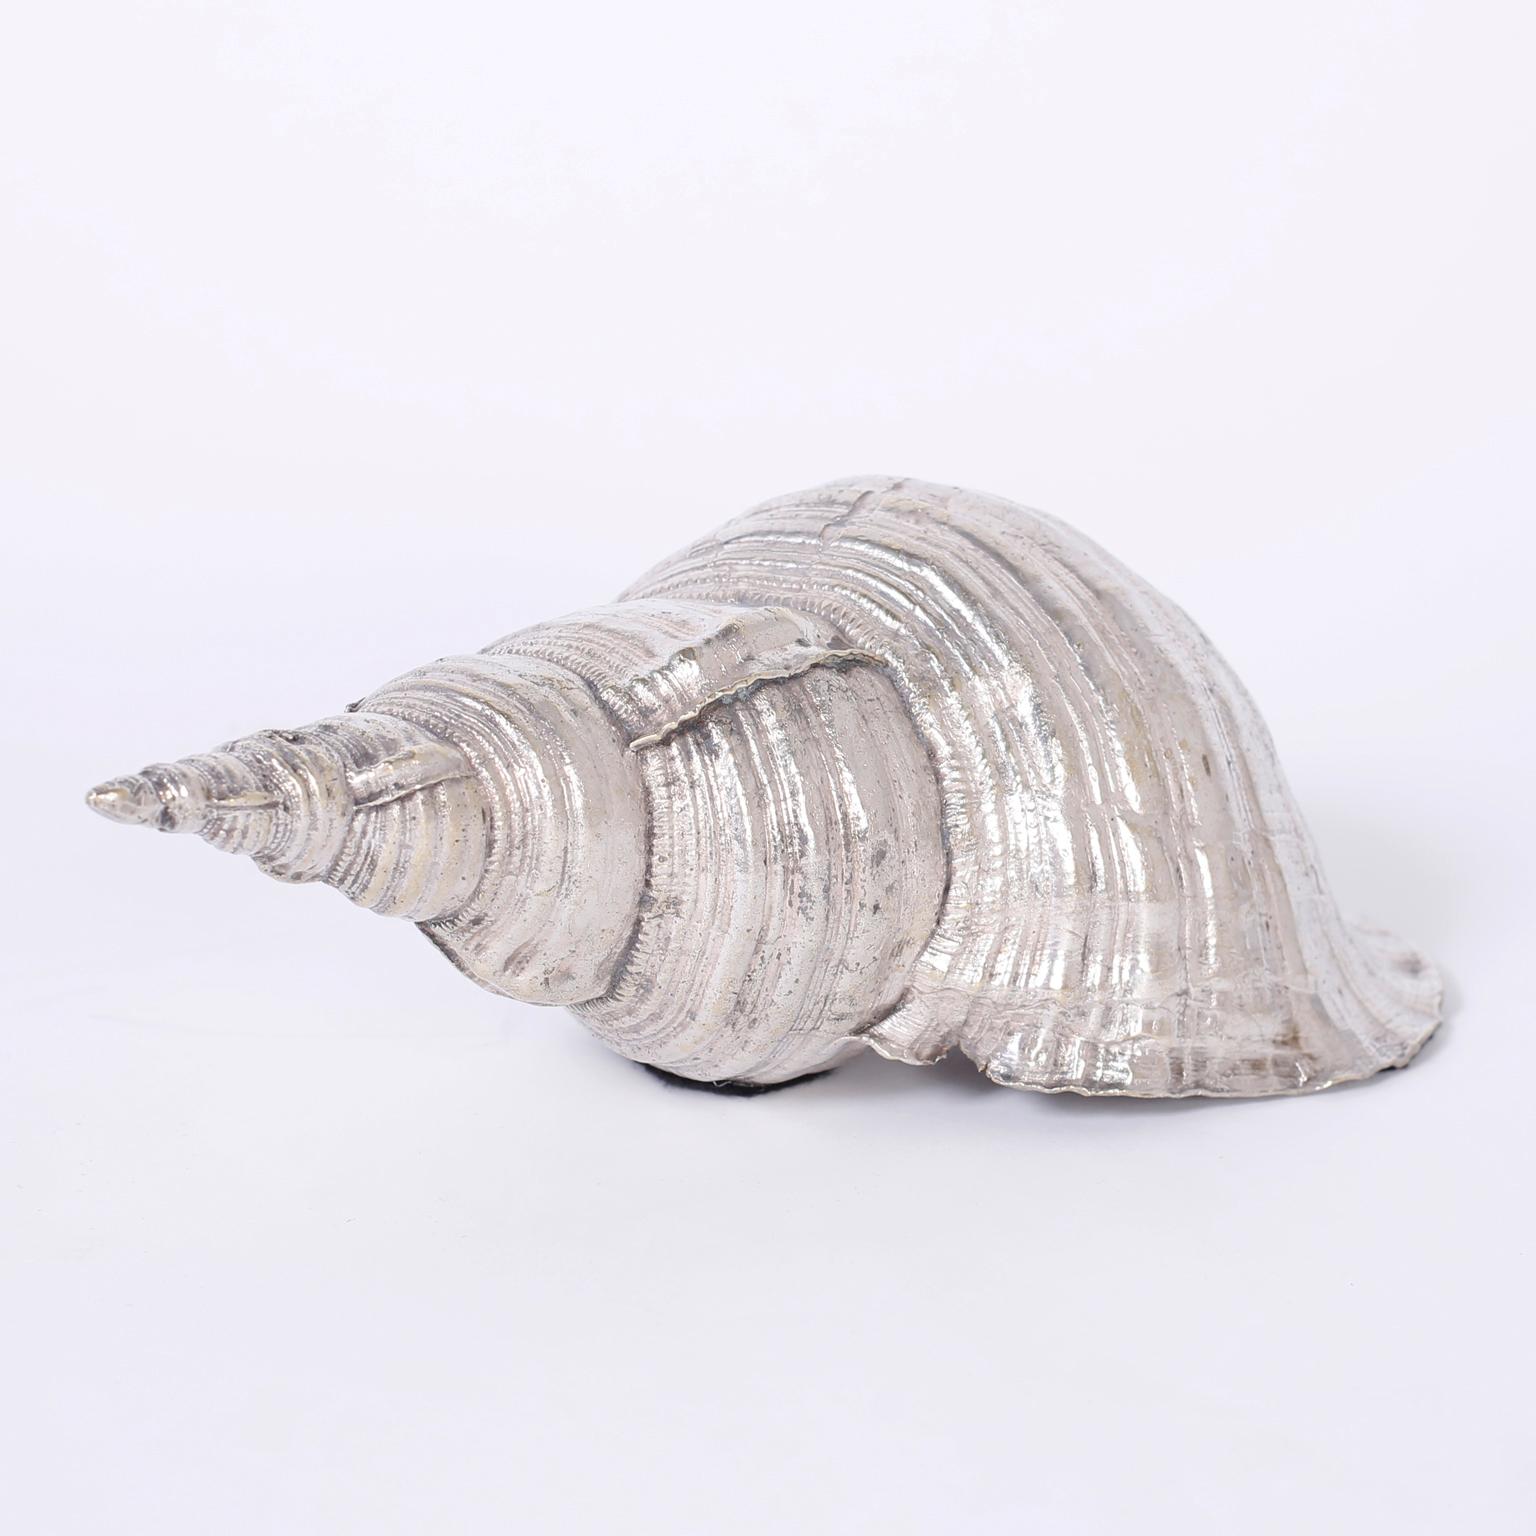 Cast Two Silver Plated Metal Seashells